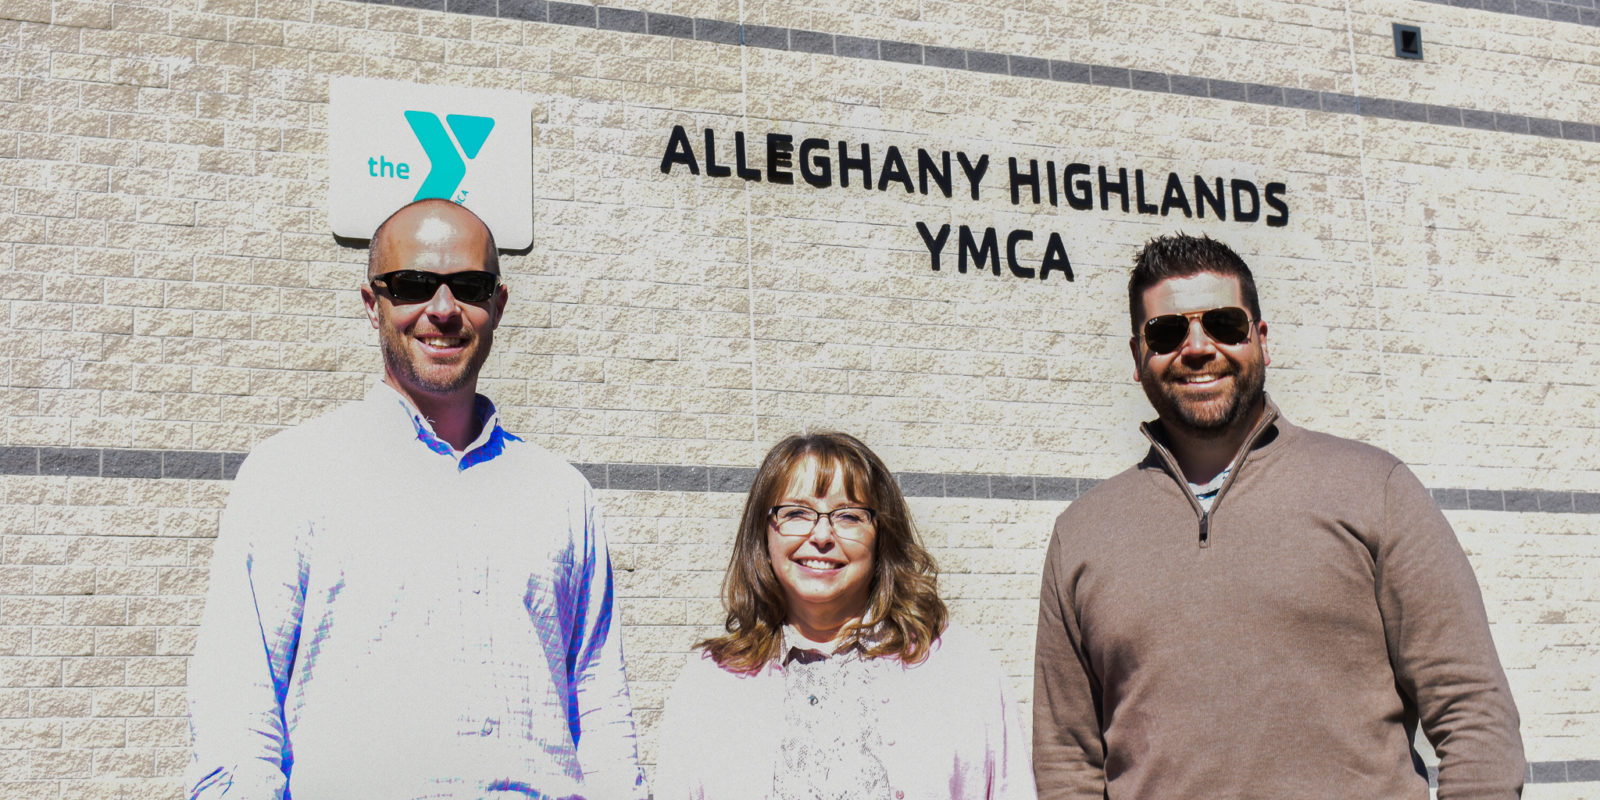 Two men stand on either side of a woman, standing in front of Alleghany Highlands YMCA building